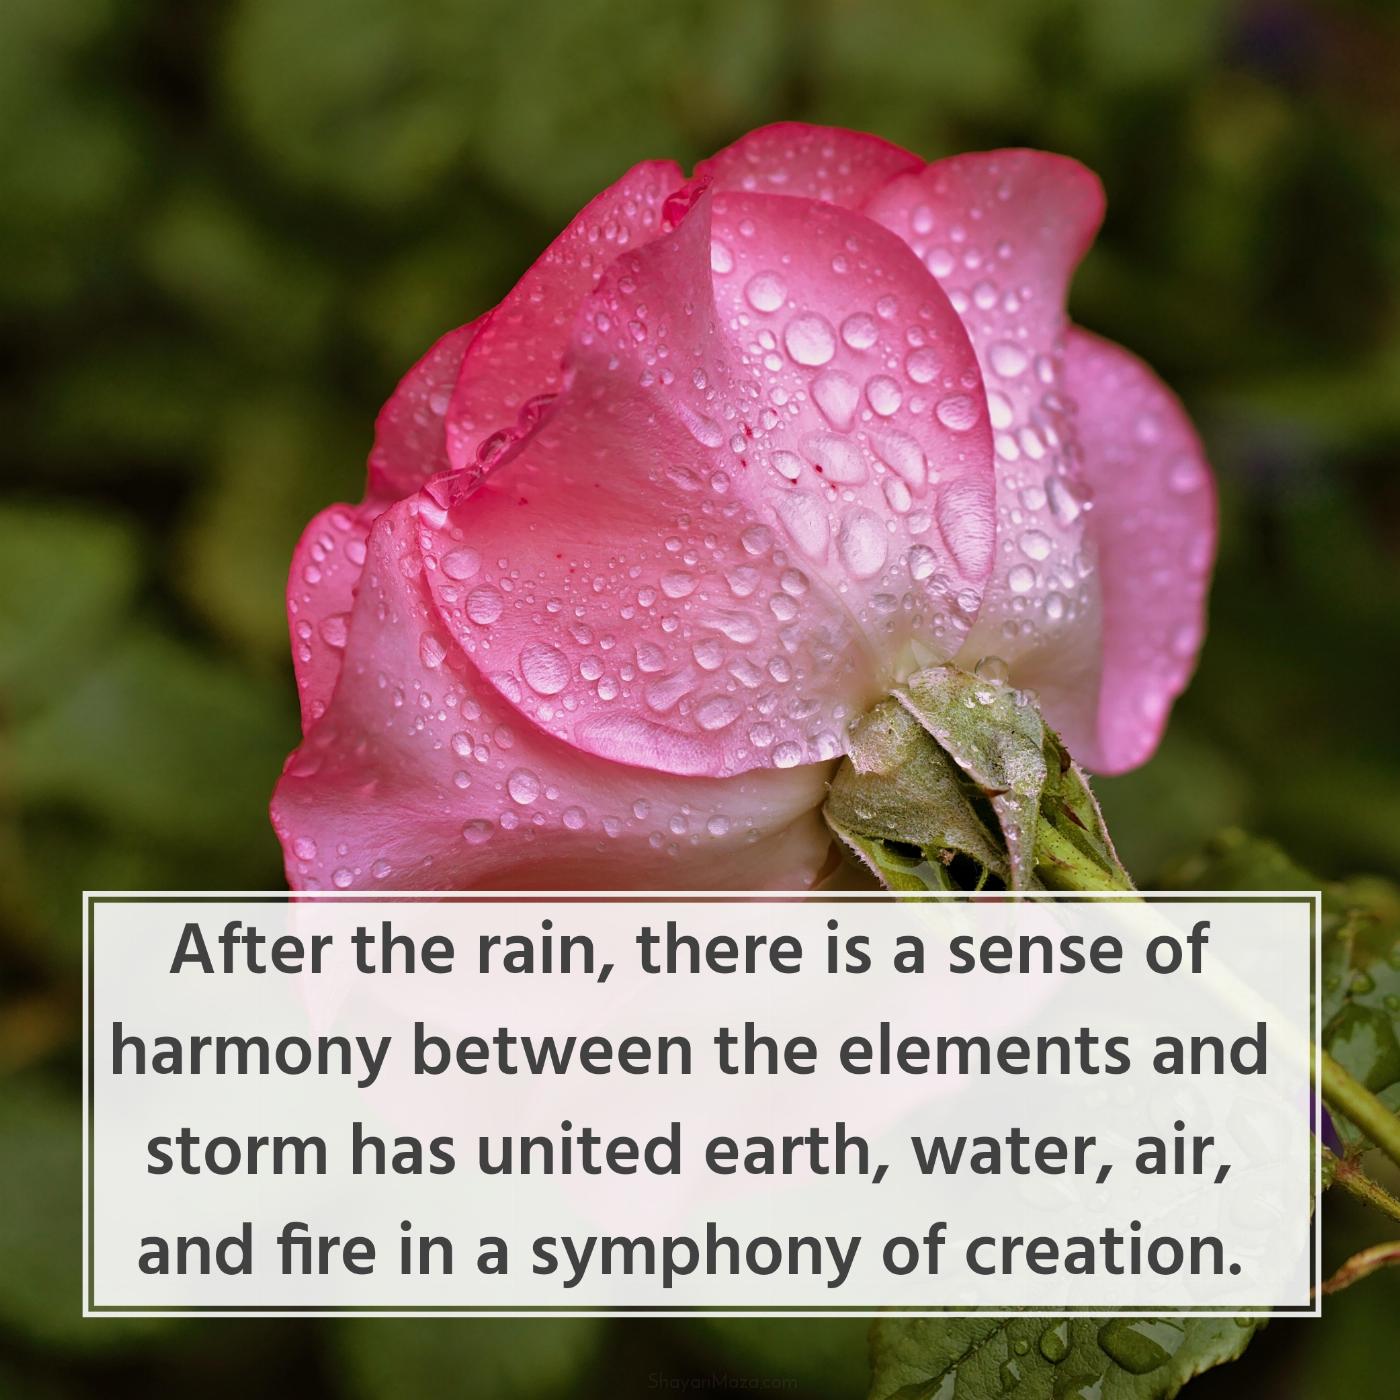 After the rain there is a sense of harmony between the elements